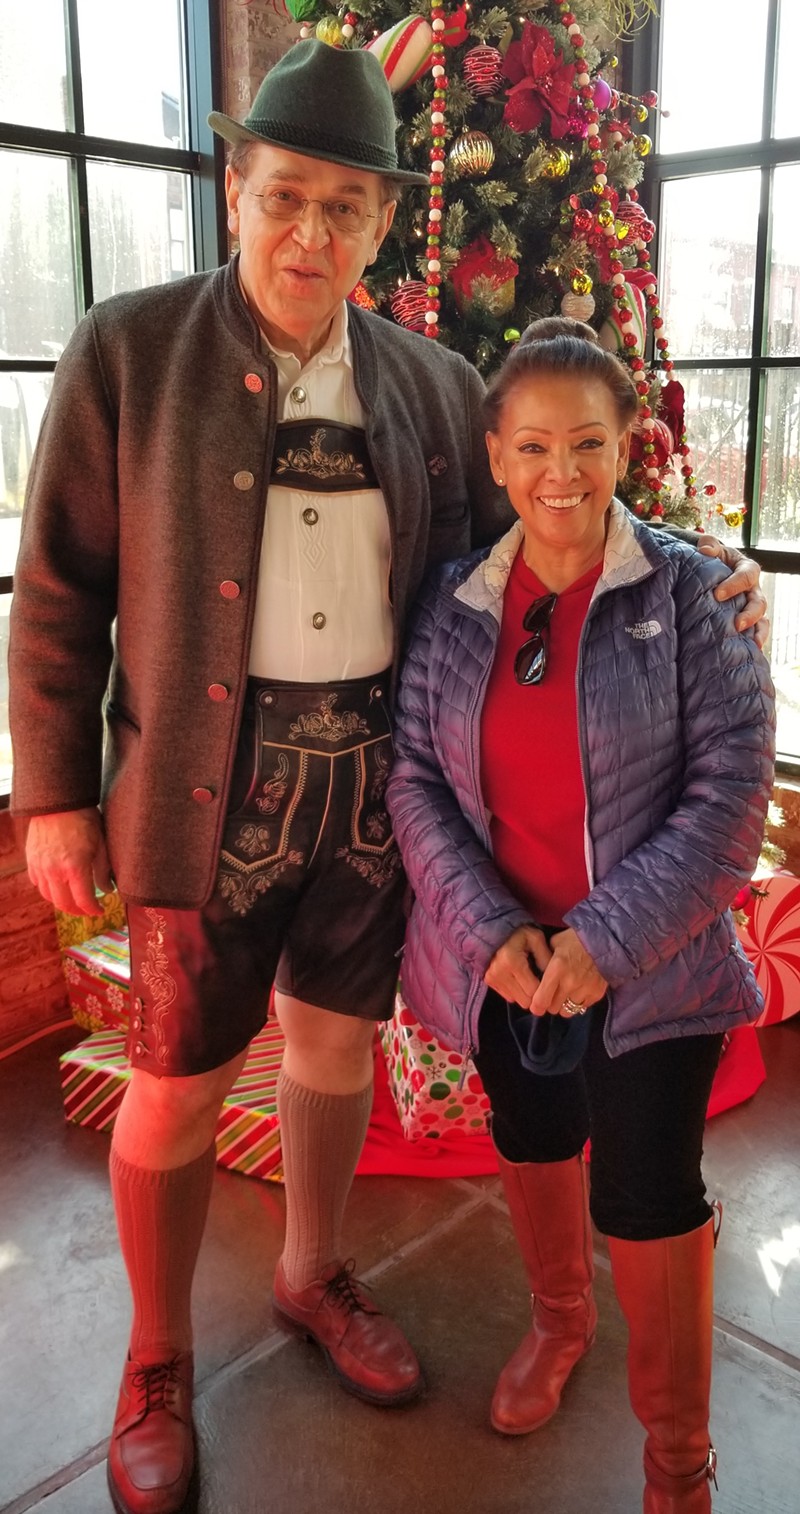 Neil and Veronica Putz take a break from the parlor tours one year to snap a photo. Neil, whose family is from Austria, says likes to dress up in Austrian-German clothes for the tours. - VIA NEIL AND VERONICA PUTZ